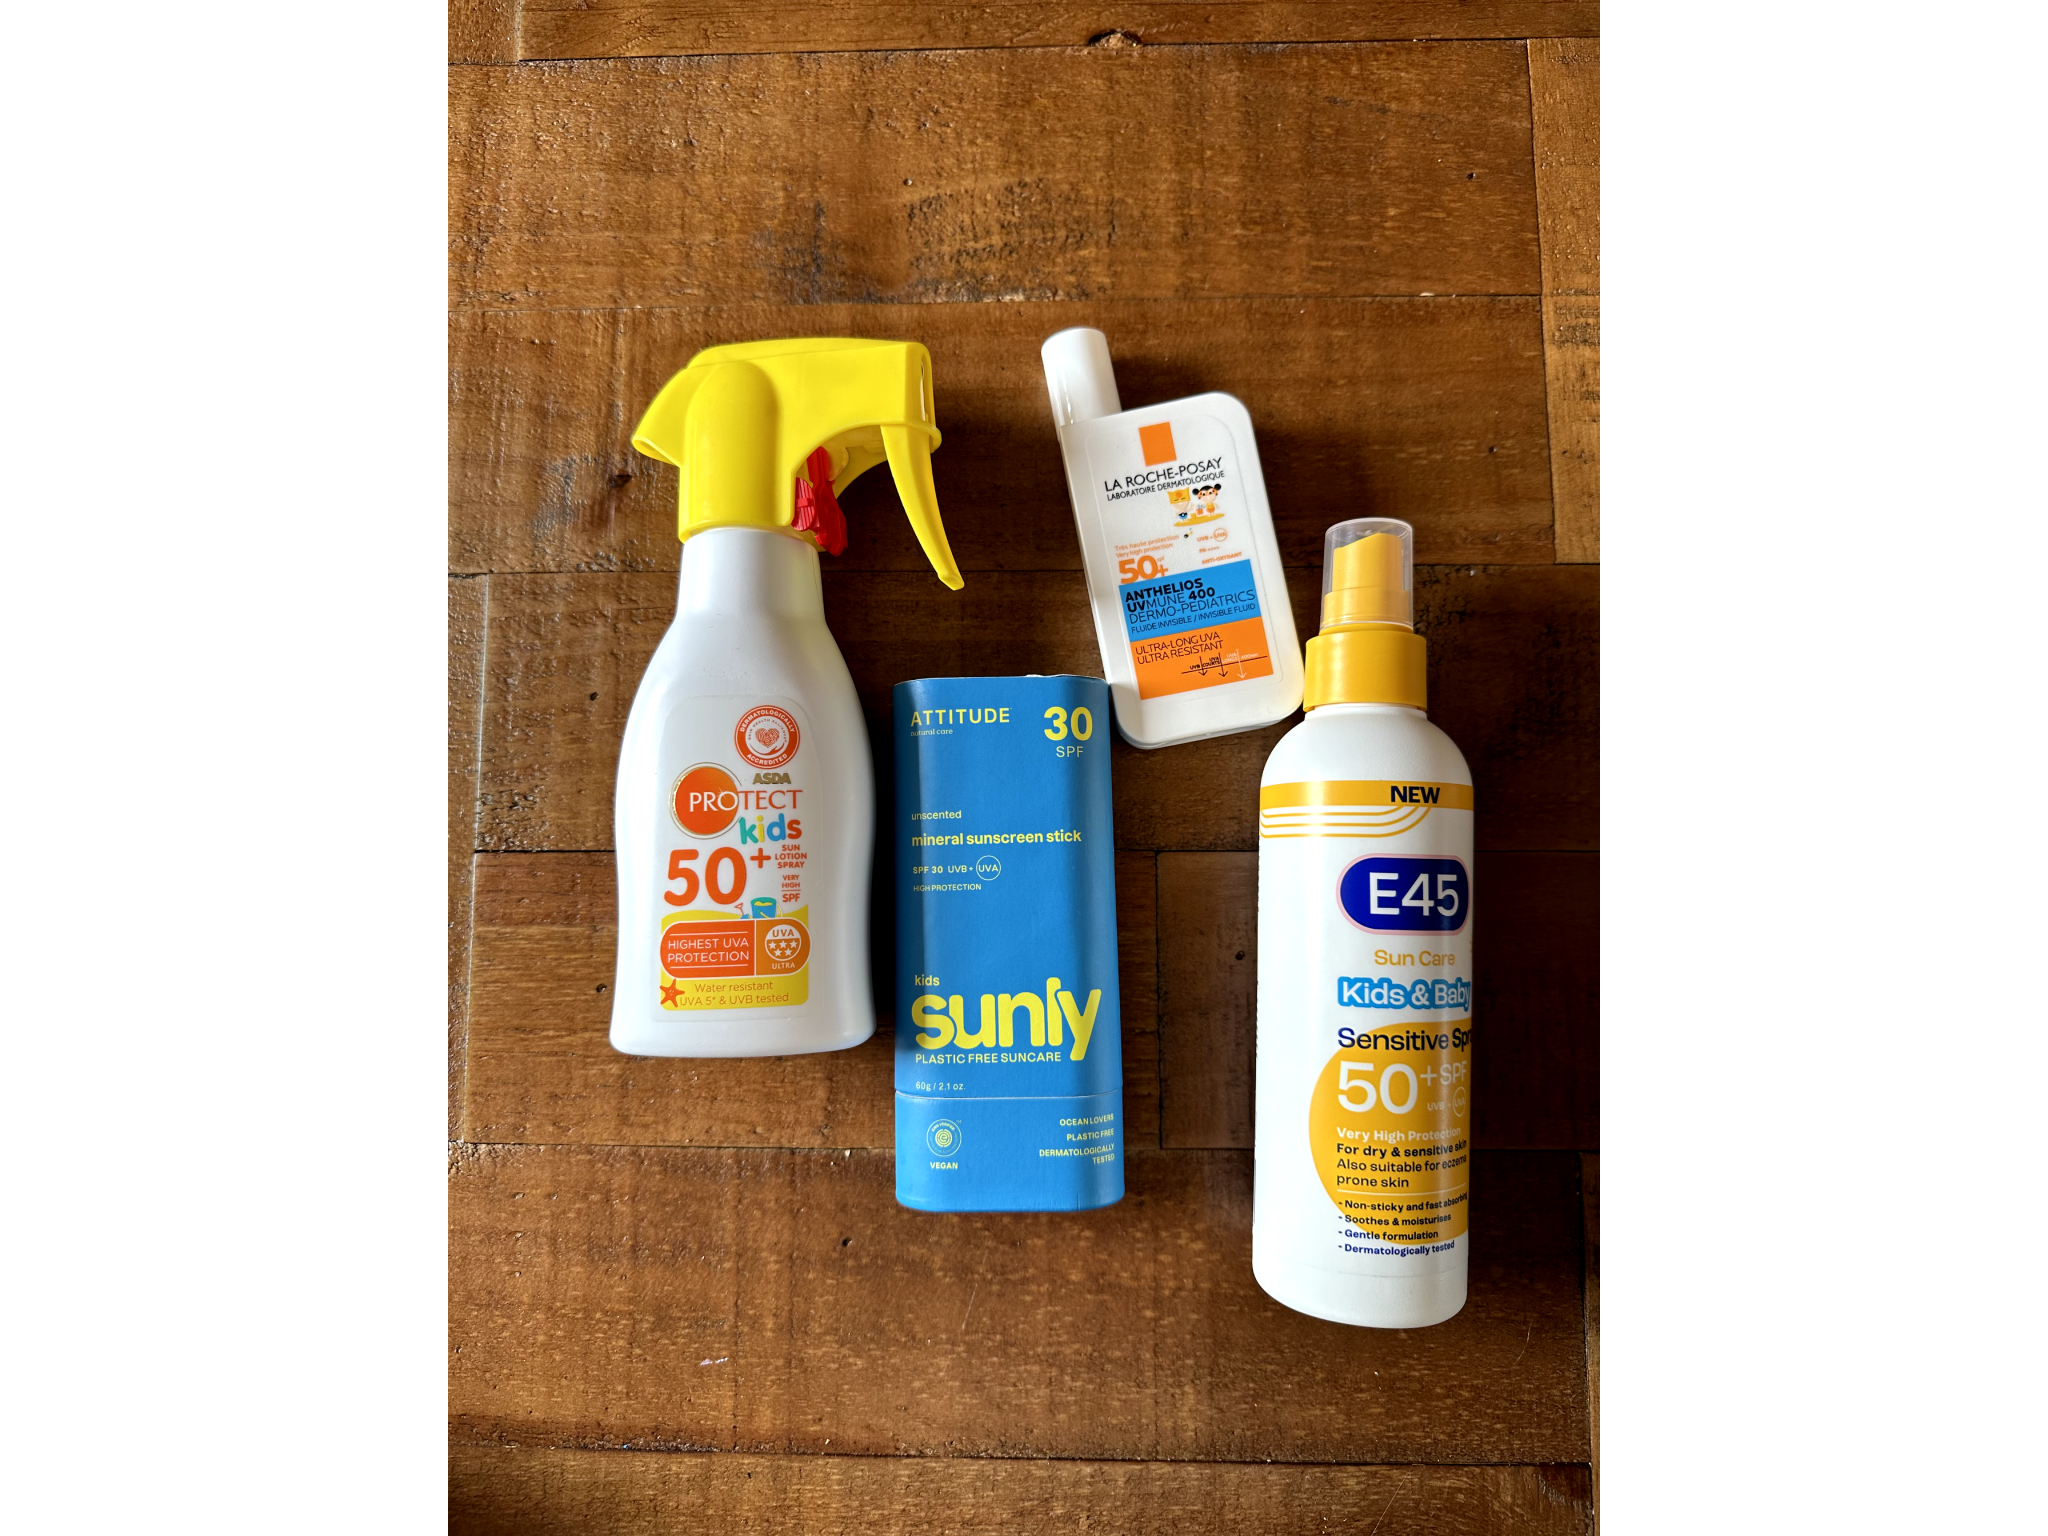 Just some of the sunscreens we slathered on our kids